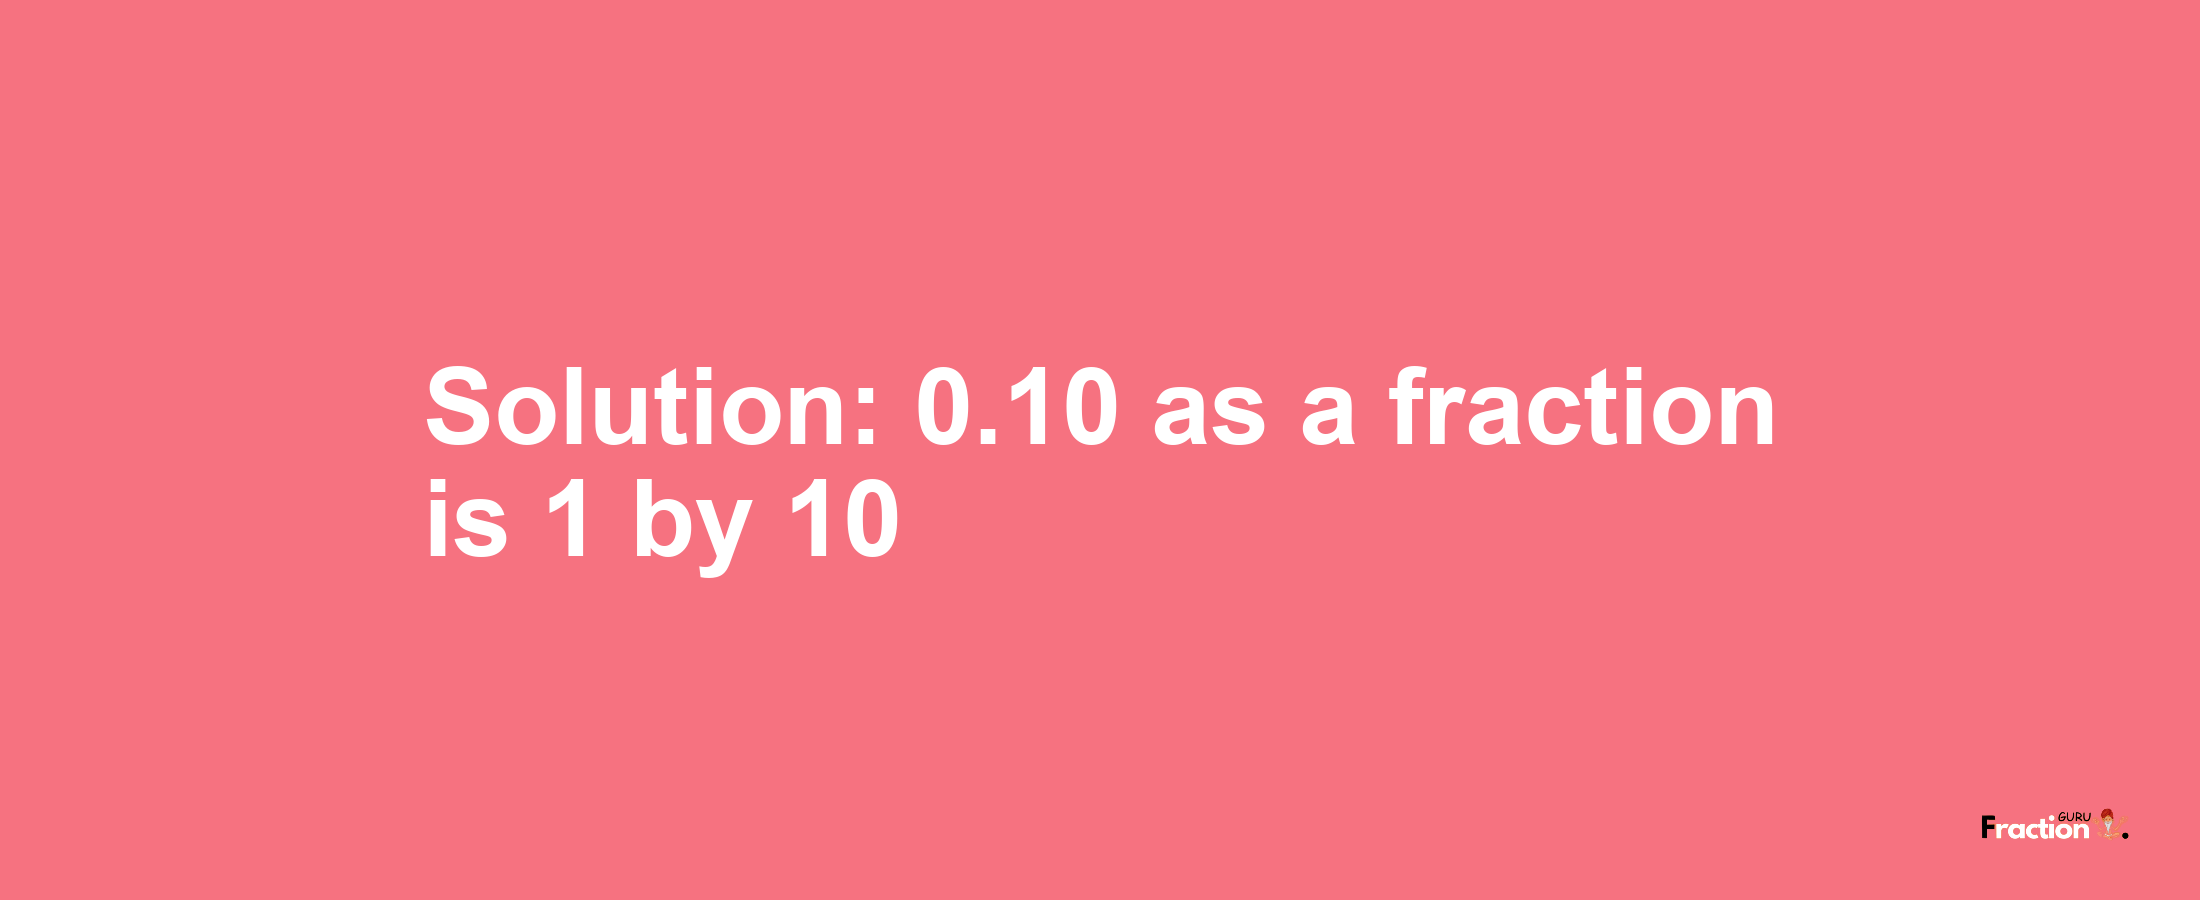 Solution:0.10 as a fraction is 1/10